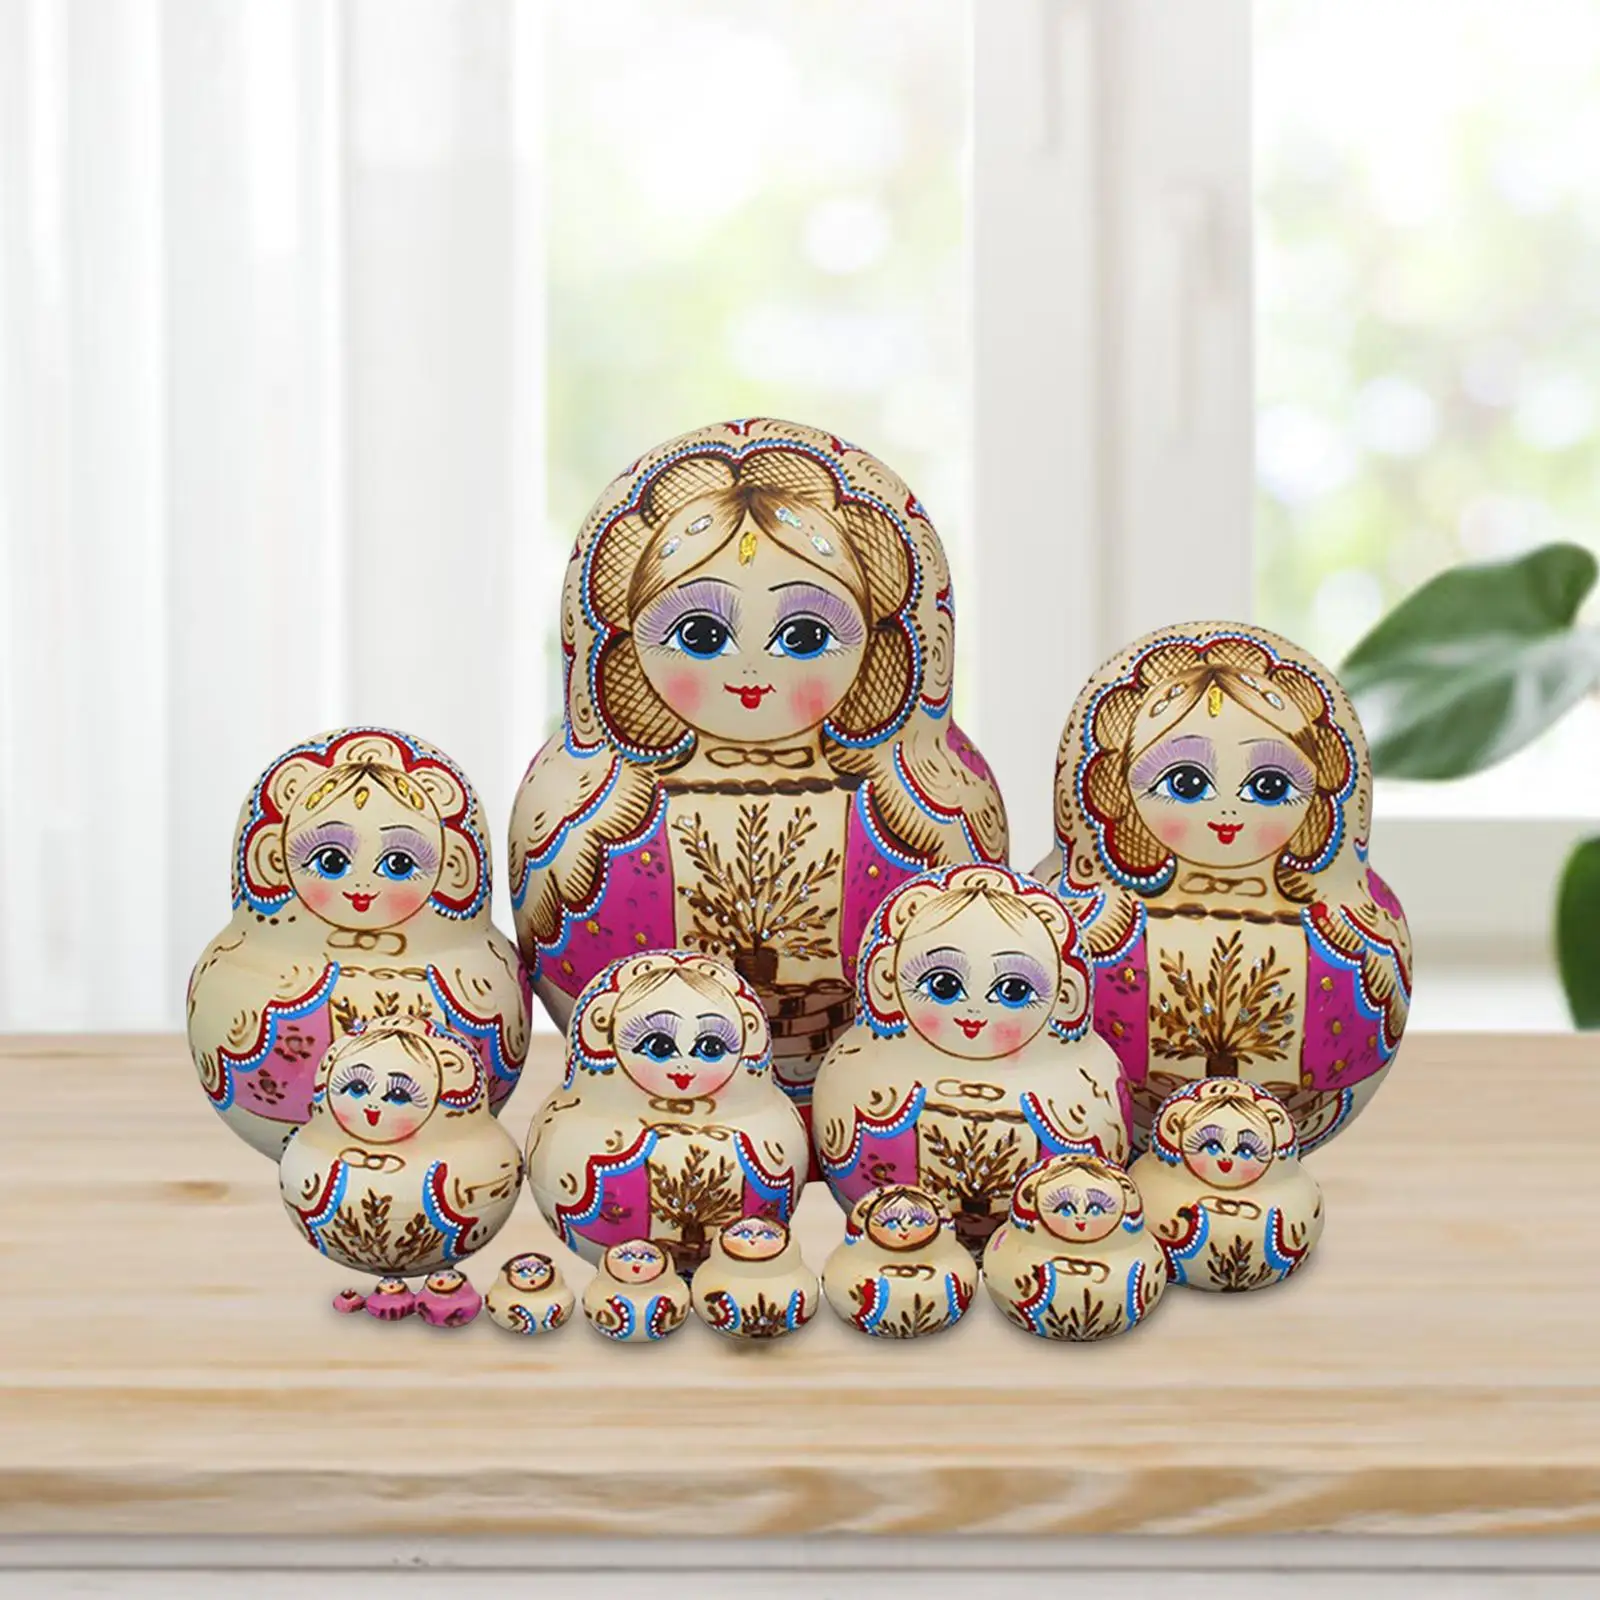 15 Pieces Wood Nesting Doll Decoration Stacking Collectible Crafts Russian Nesting Doll for Home Room Halloween Kids Children